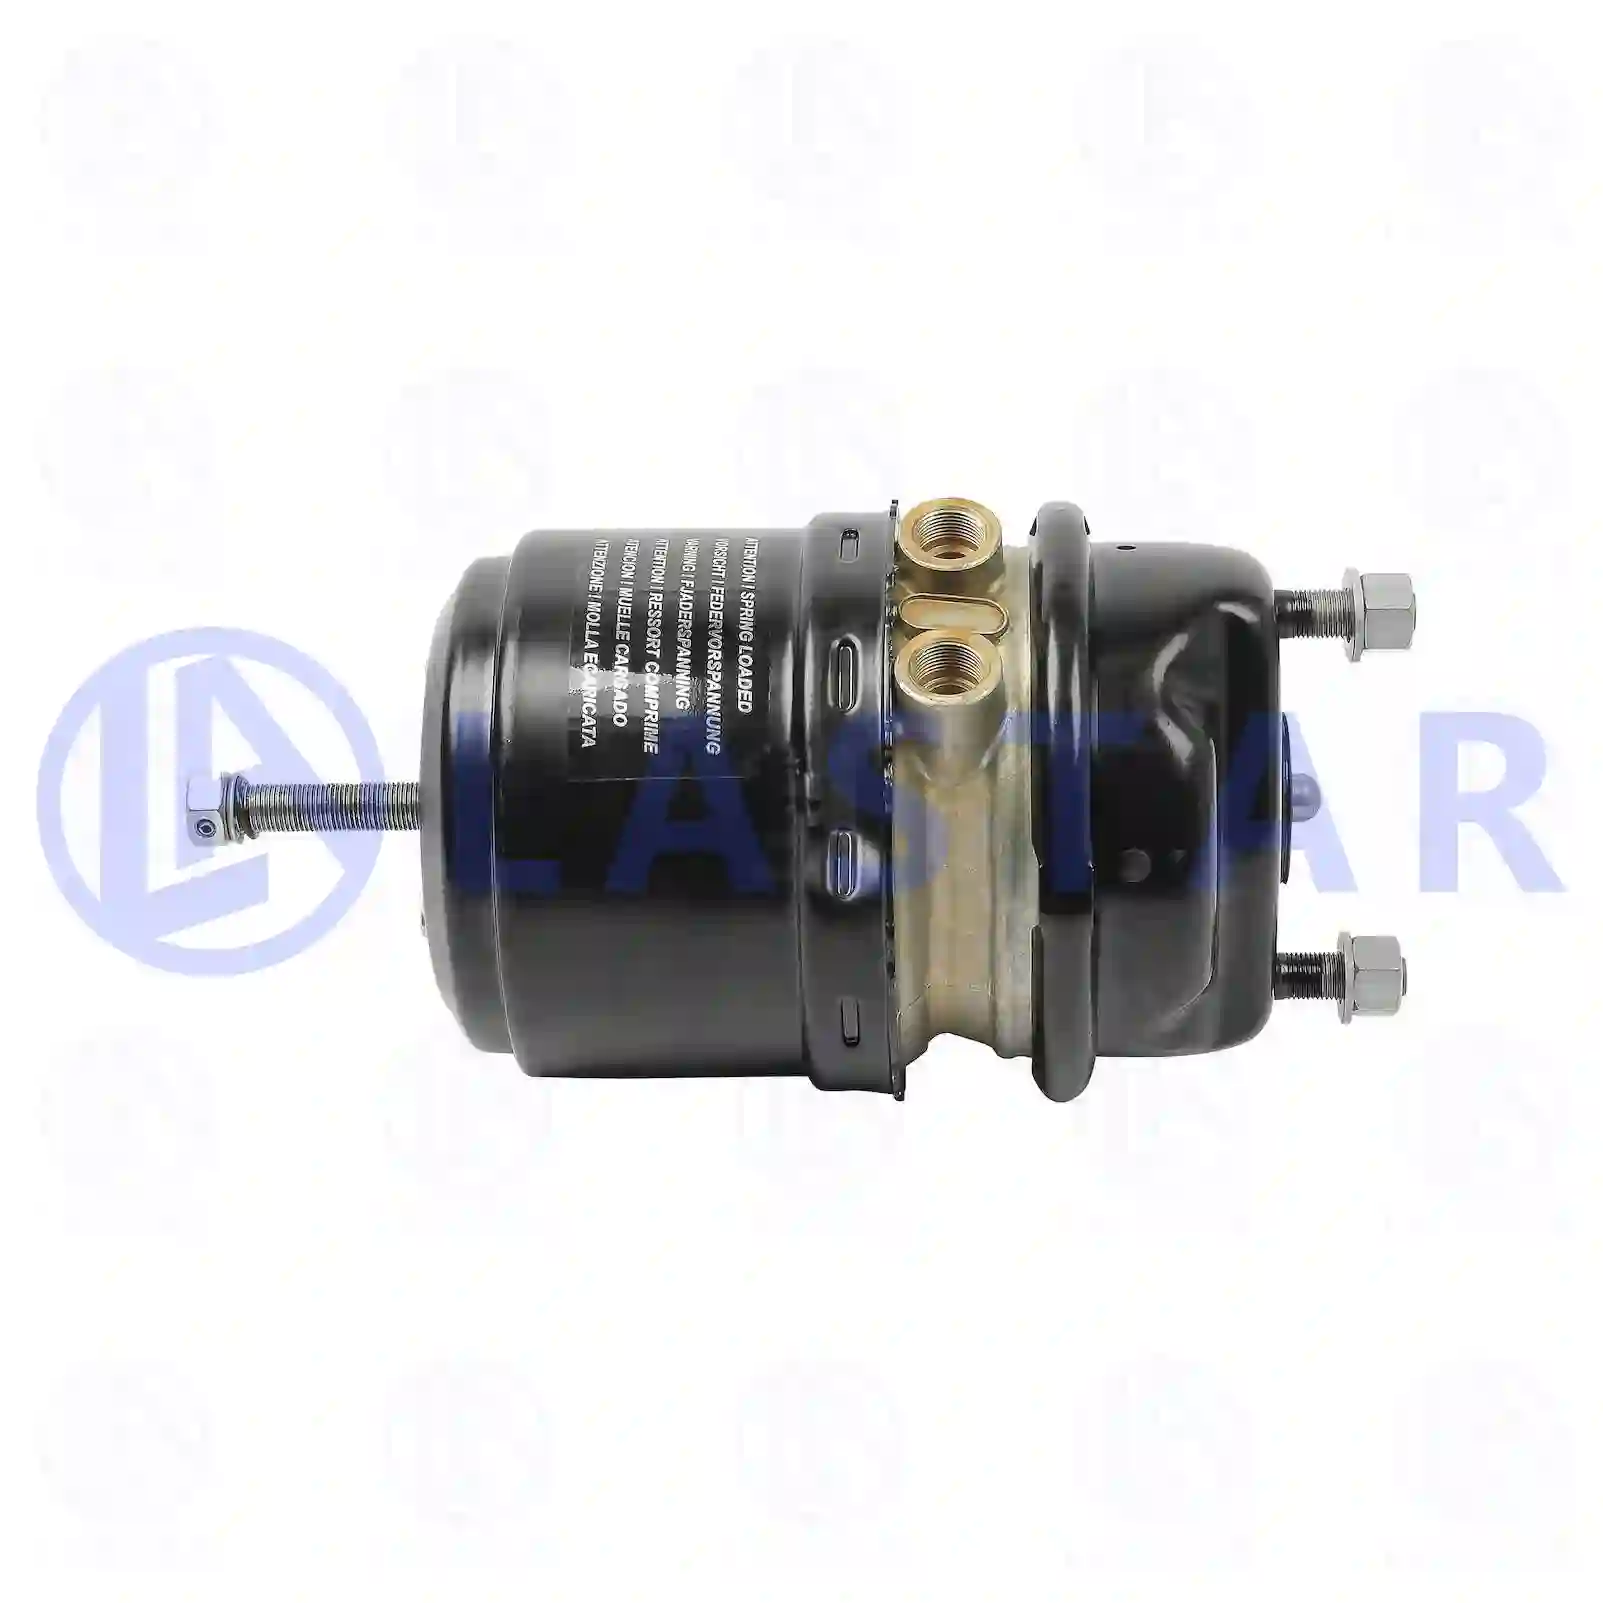 Spring brake cylinder, right, 77714434, 1519378, 0154209318, 0154209718, 0194205718, 0194206718 ||  77714434 Lastar Spare Part | Truck Spare Parts, Auotomotive Spare Parts Spring brake cylinder, right, 77714434, 1519378, 0154209318, 0154209718, 0194205718, 0194206718 ||  77714434 Lastar Spare Part | Truck Spare Parts, Auotomotive Spare Parts